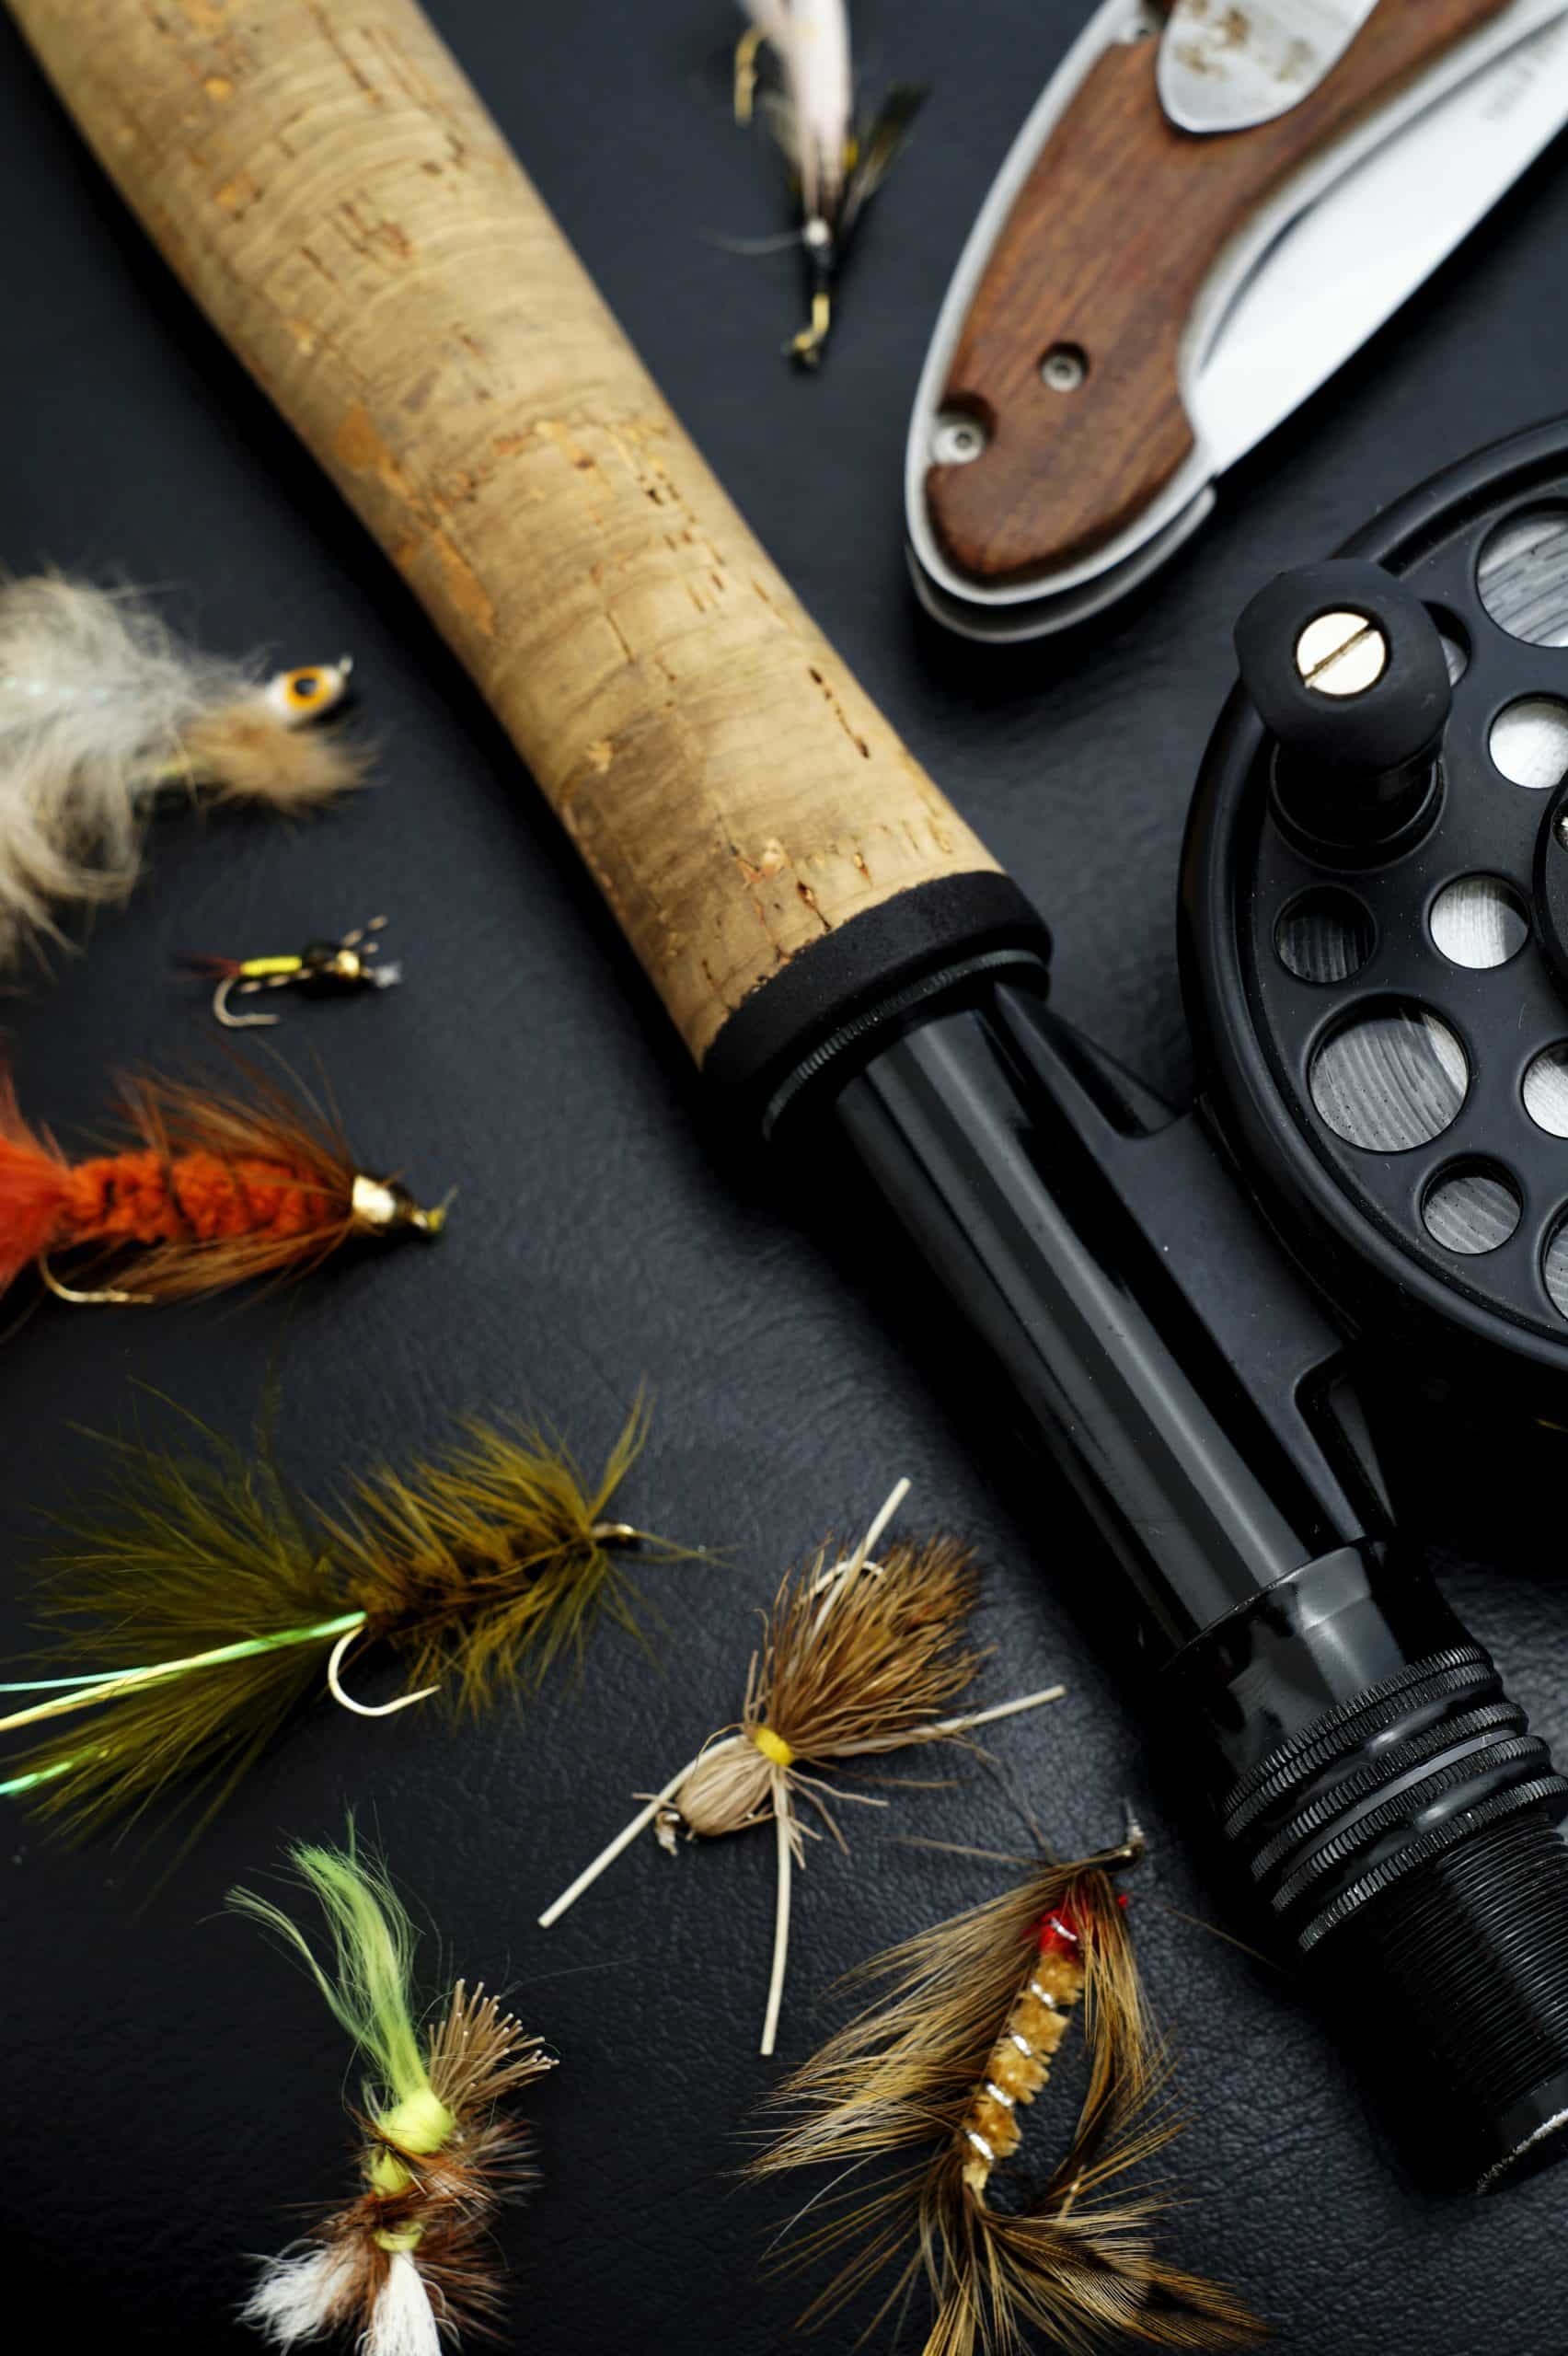 An image of fishing equipment. There is a fishing rod, swiss army knife and fishing floats